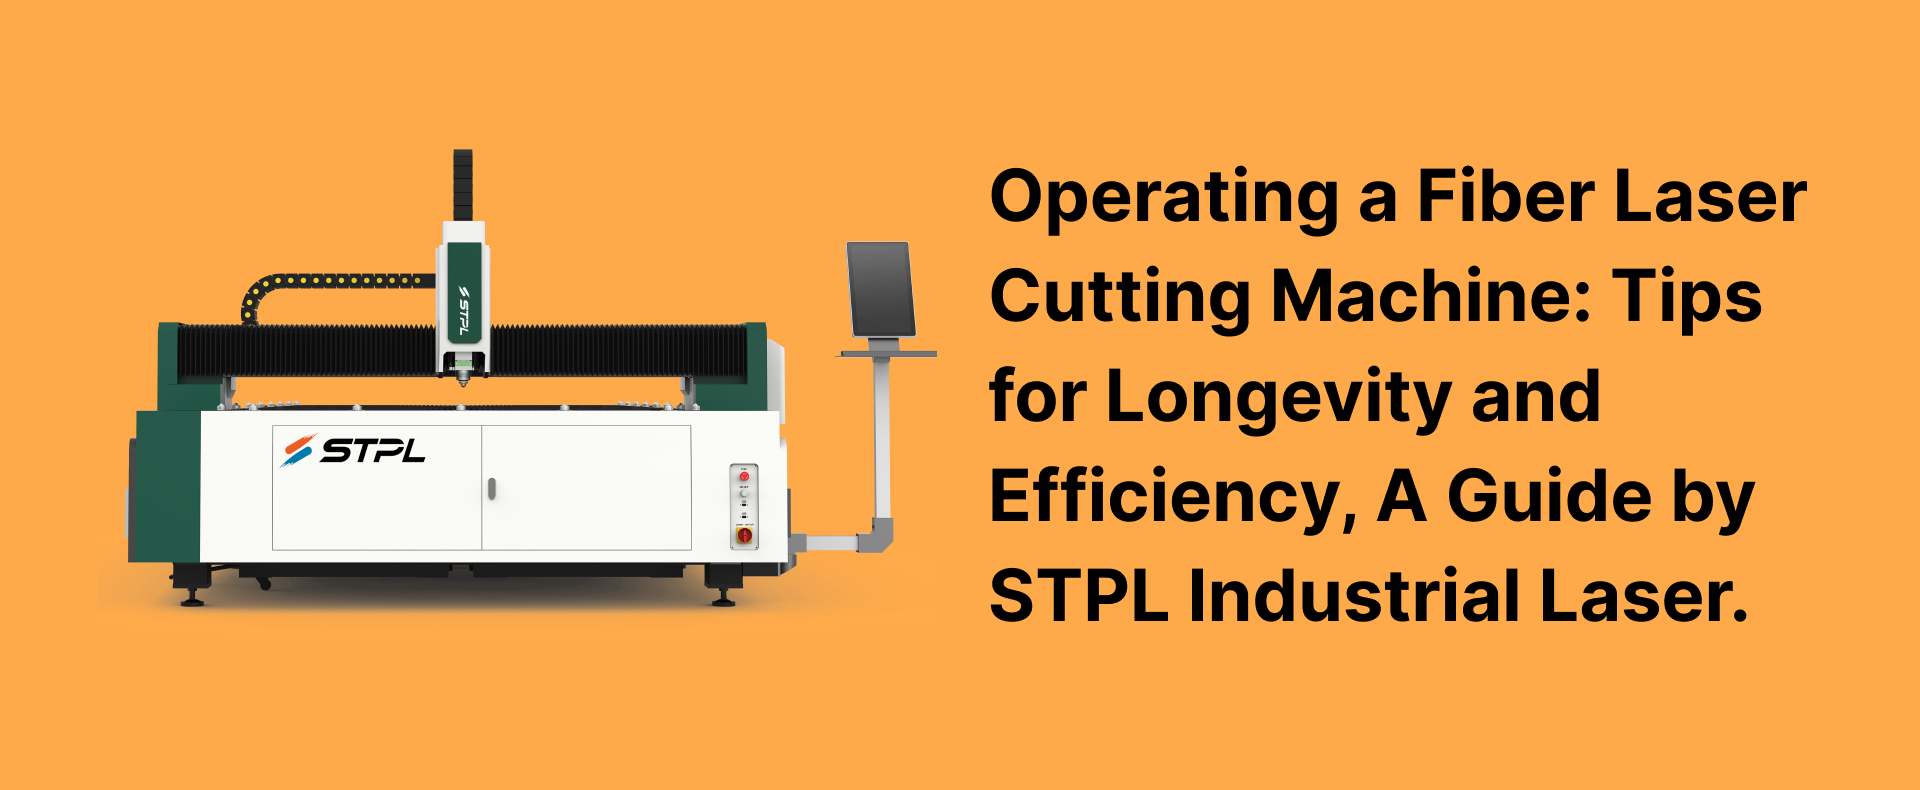 Operating a Fiber Laser Cutting Machine: Tips for Longevity and Efficiency, A Guide by STPL Industrial Laser